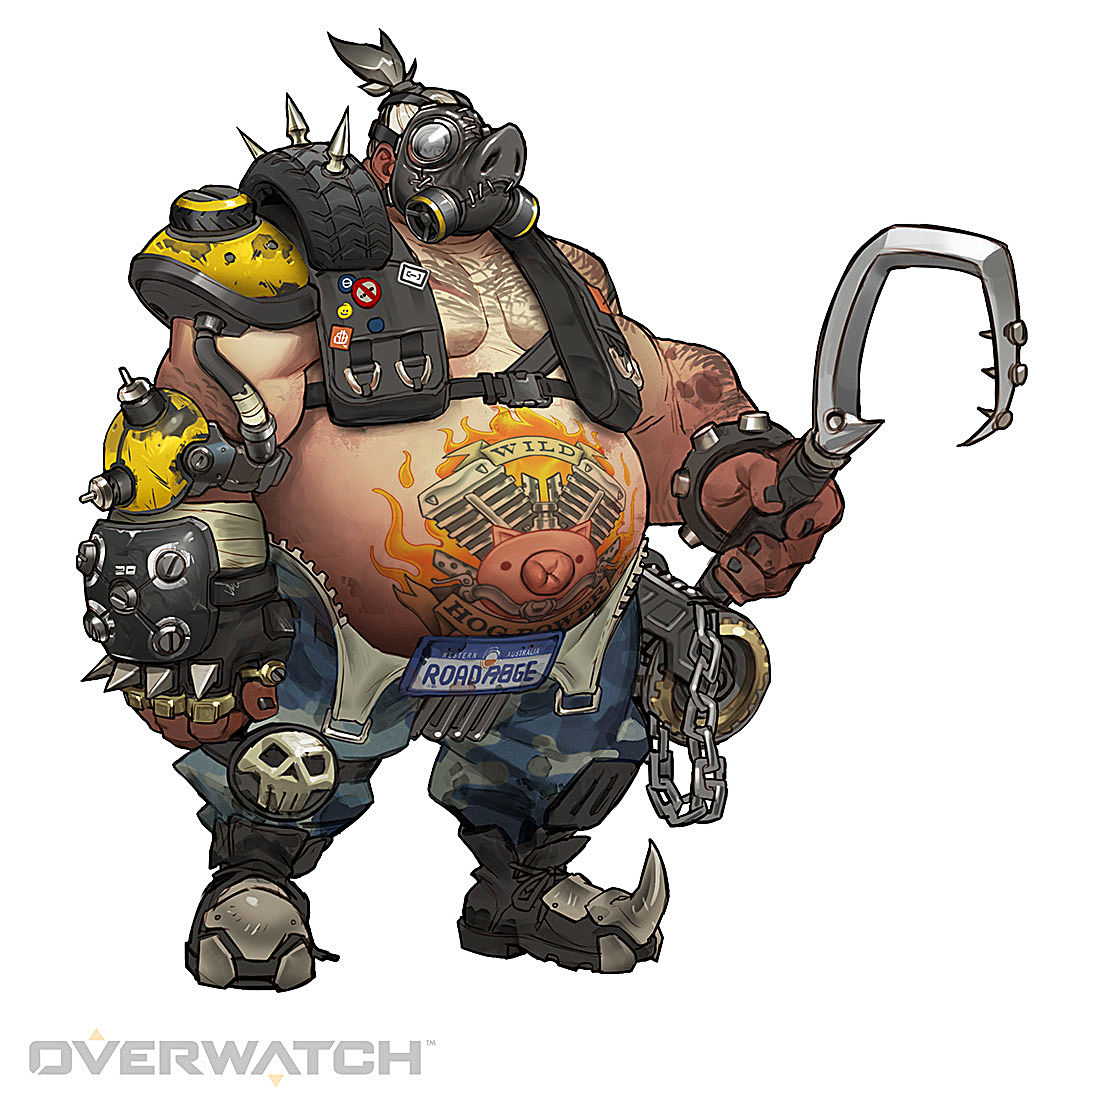 Four Overwatch Characters and Their Possible Influences 